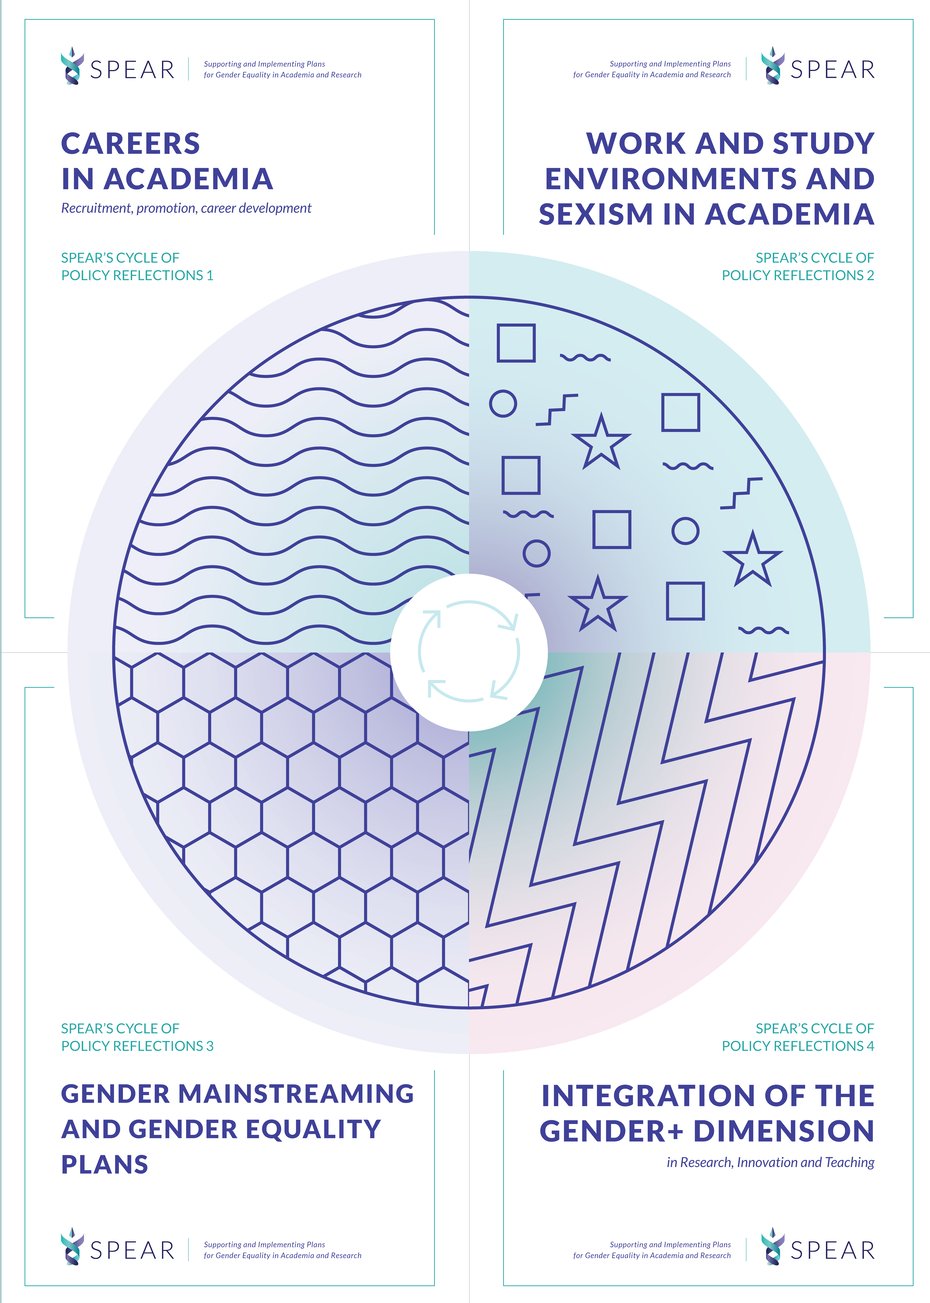 Press release: Promoting gender equality in European Academia since 2019